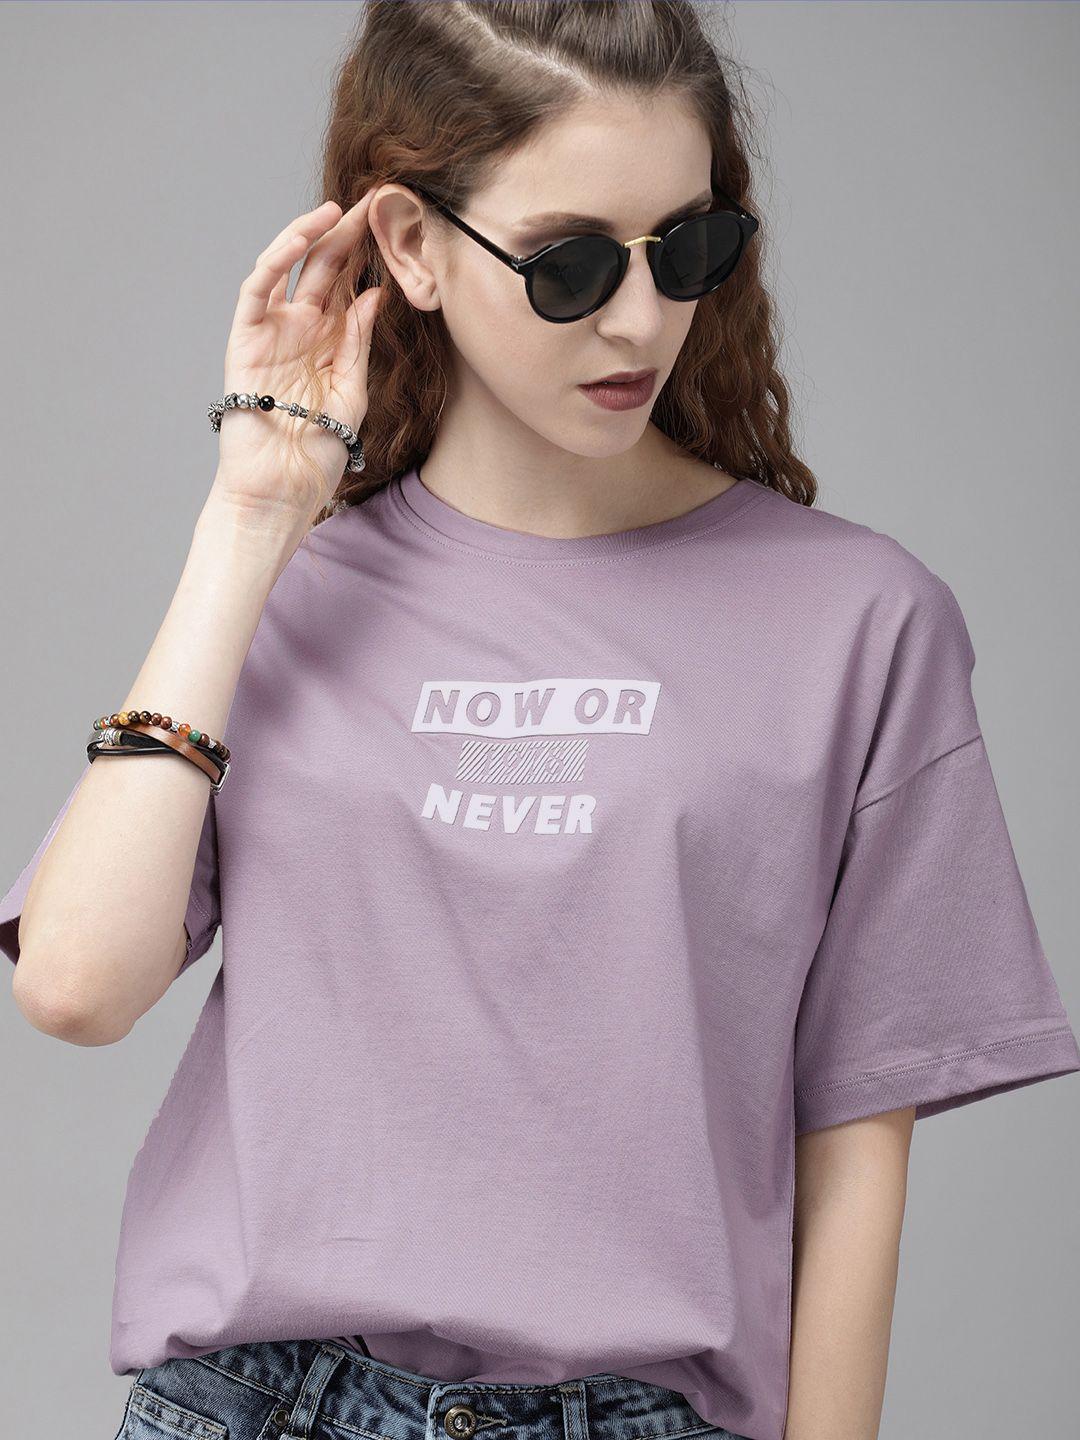 the roadster lifestyle co women lavender printed cotton pure cotton t-shirt